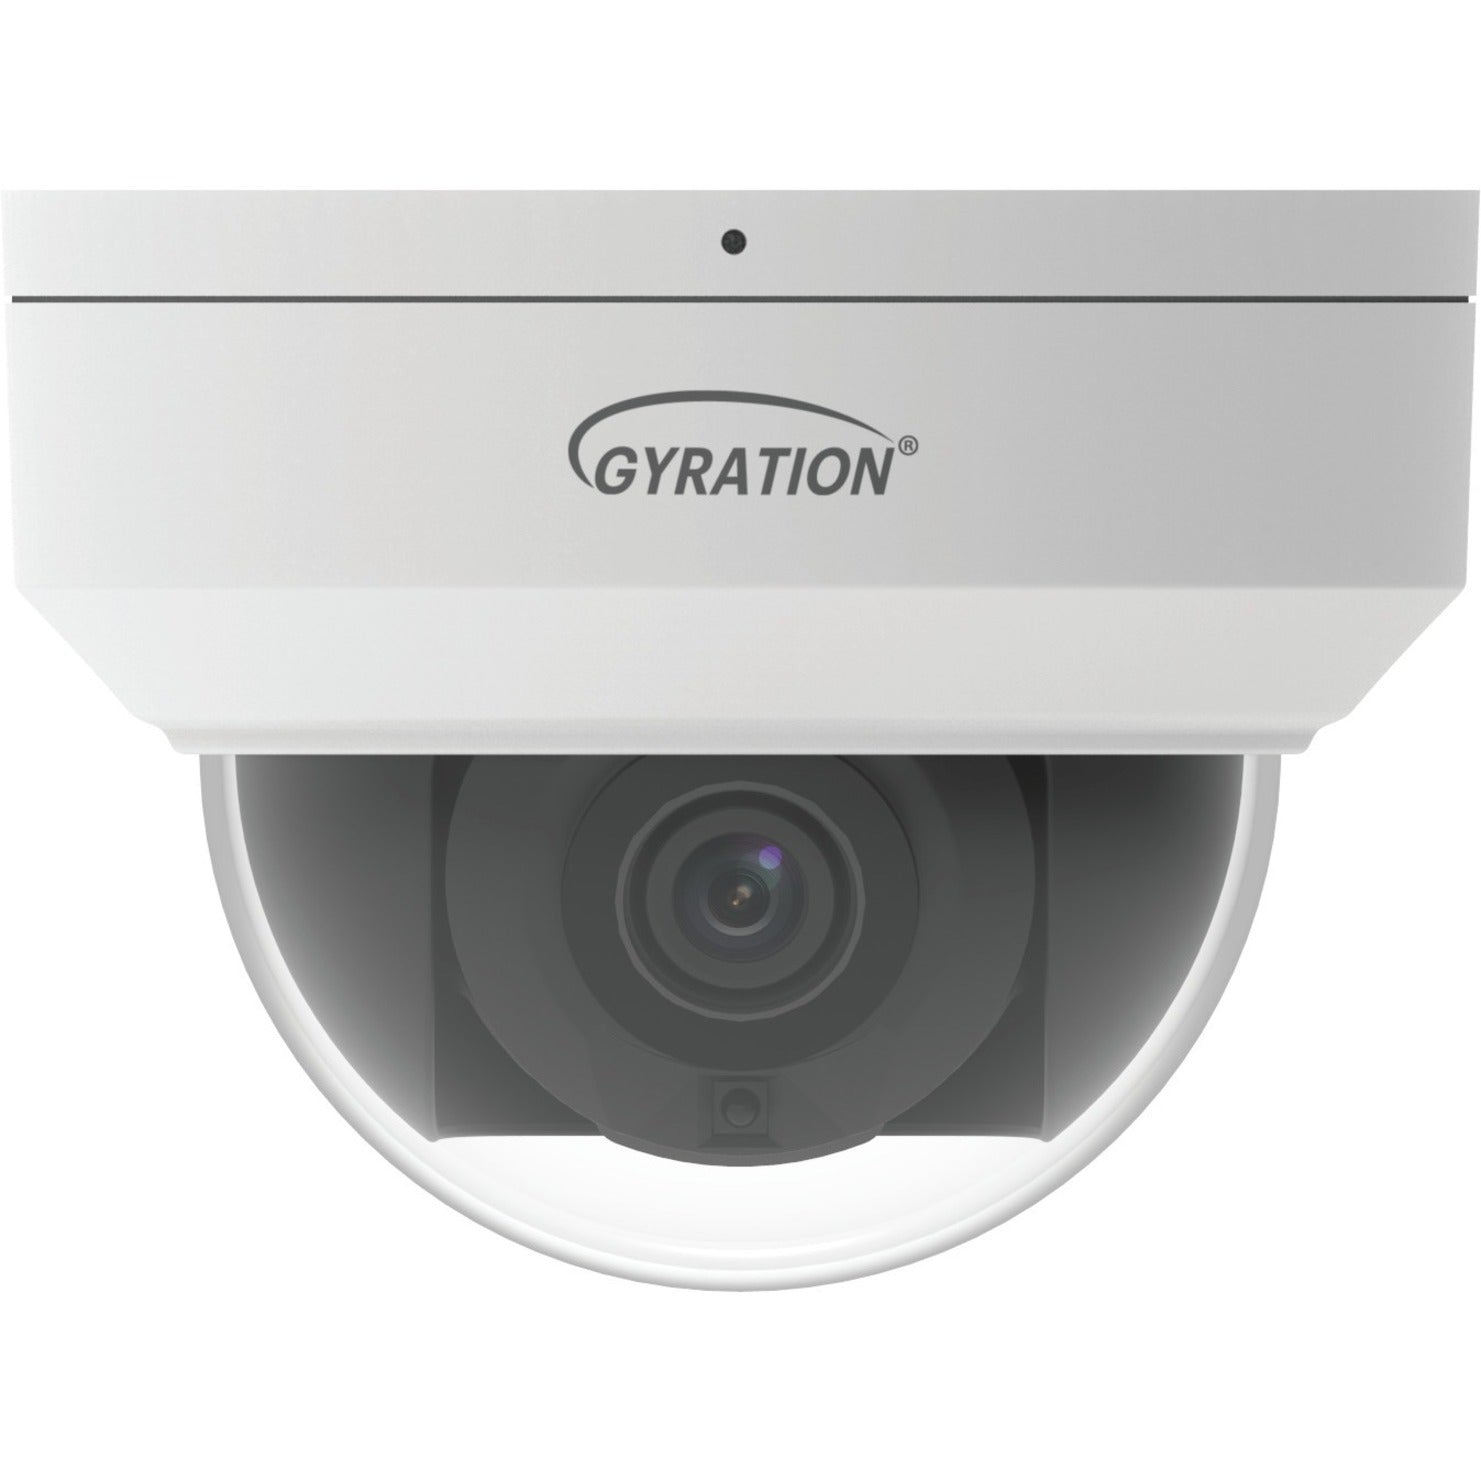 Gyration CYBERVIEW 810D 8 MP Outdoor Intelligent Fixed Dome Camera, Ultra HD Video, Night Vision, Wide Dynamic Range, SD Card Storage